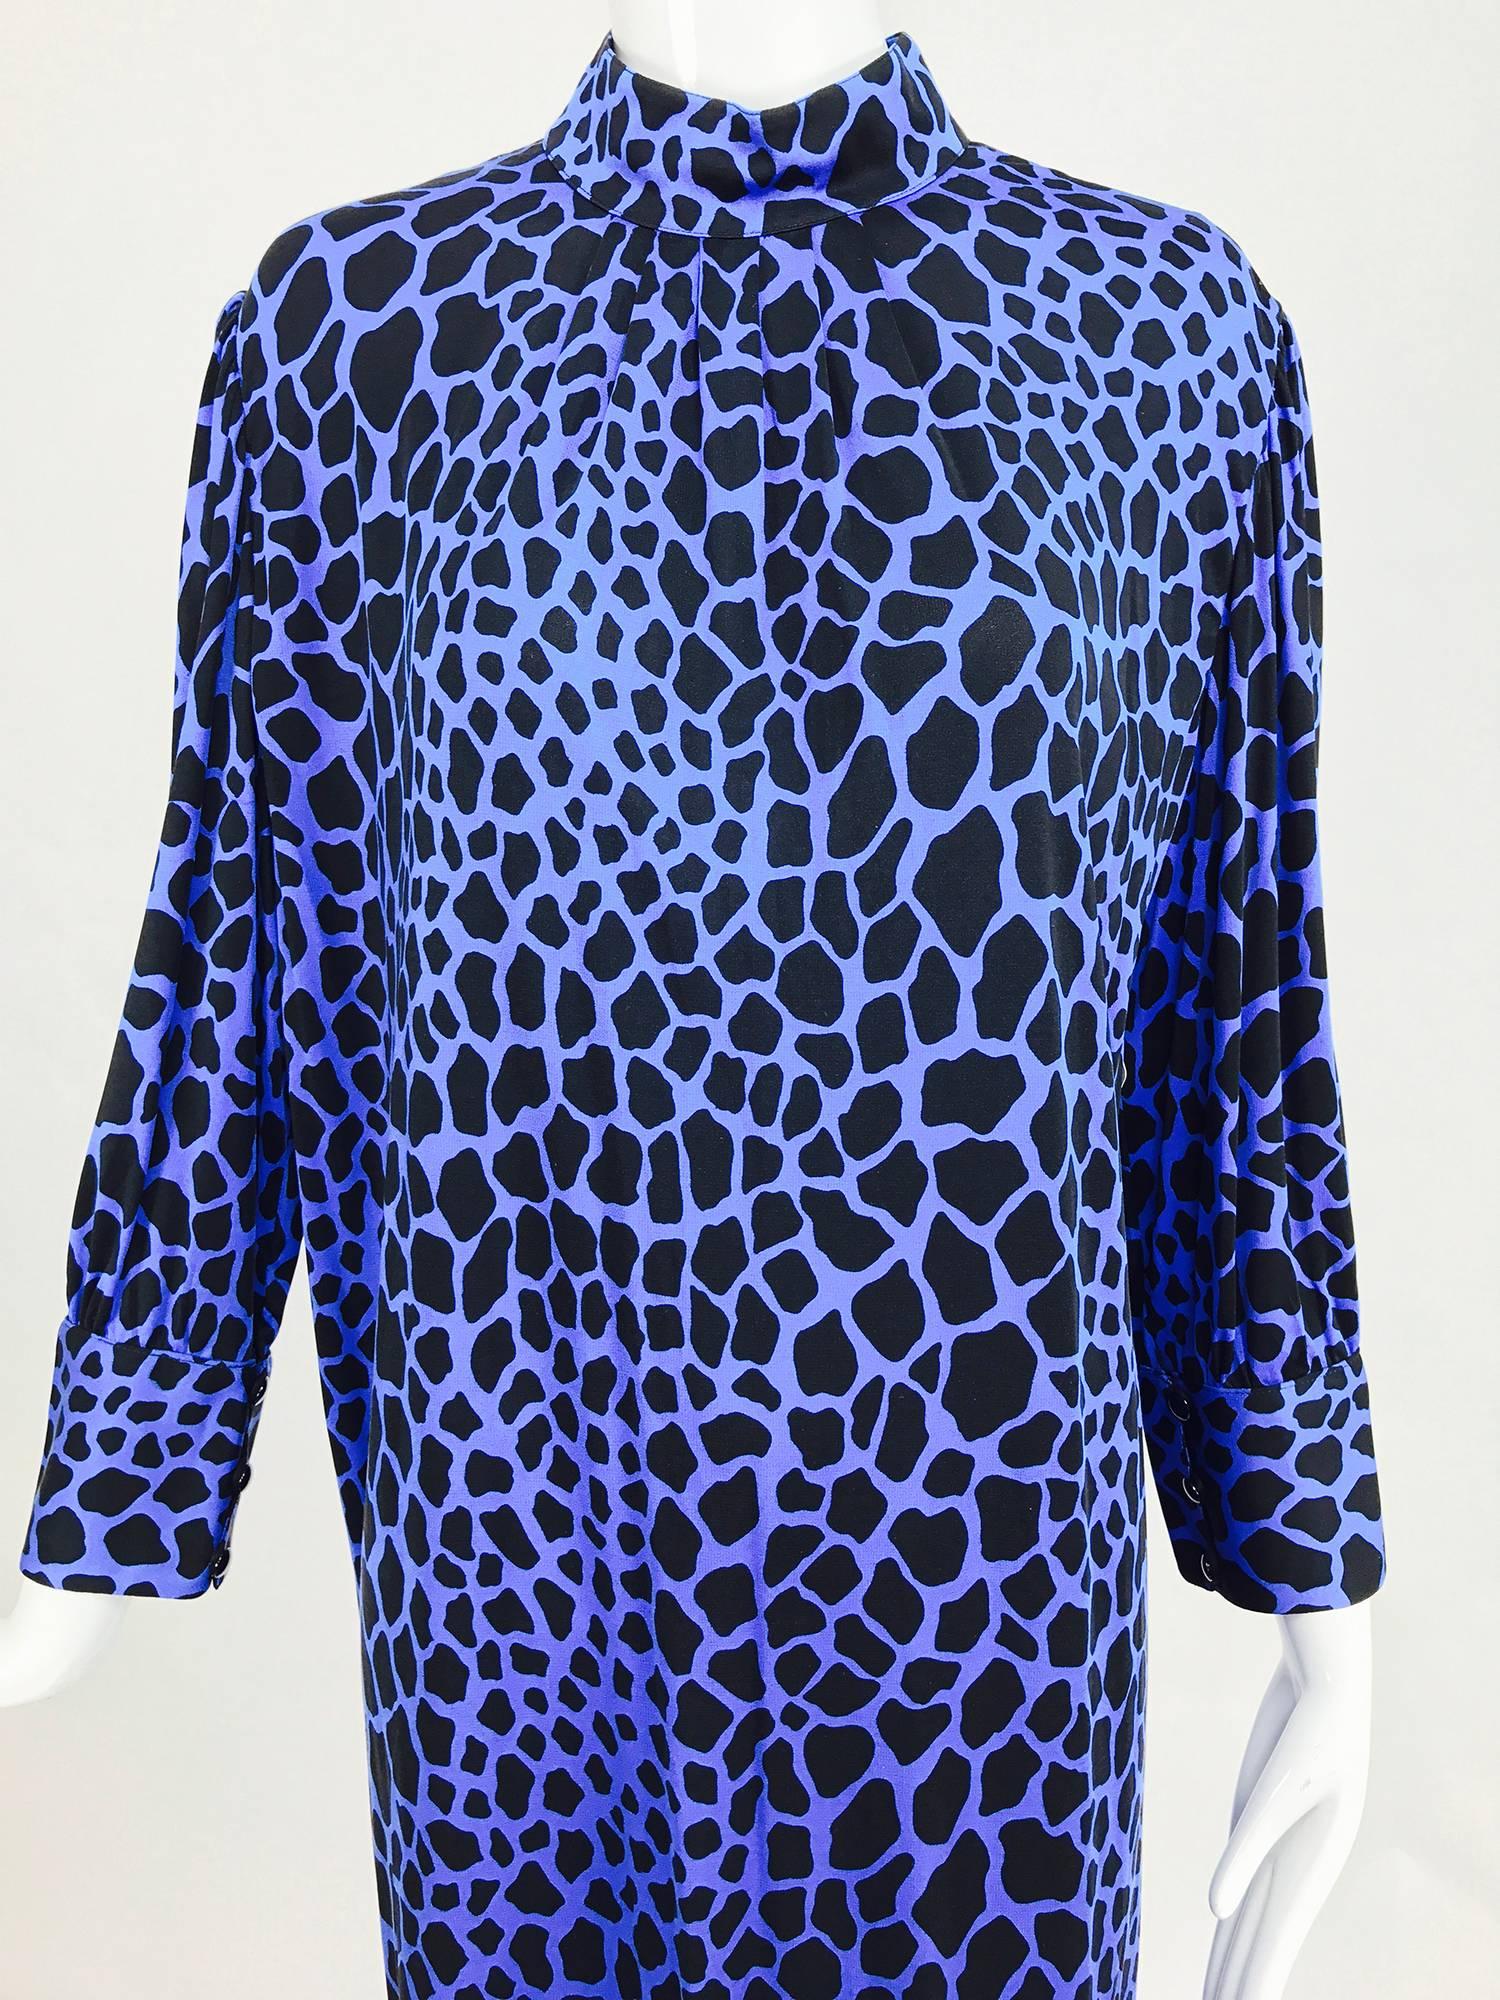 Gibi, Roma black and blue leopard spot fine silk jersey dress from the 1970s ...Mock neck dress, with long sleeves that have banded button cuffs and wrists, the dress is lightly gathered at the neck front and falls straight to hem...Unlined...Closes